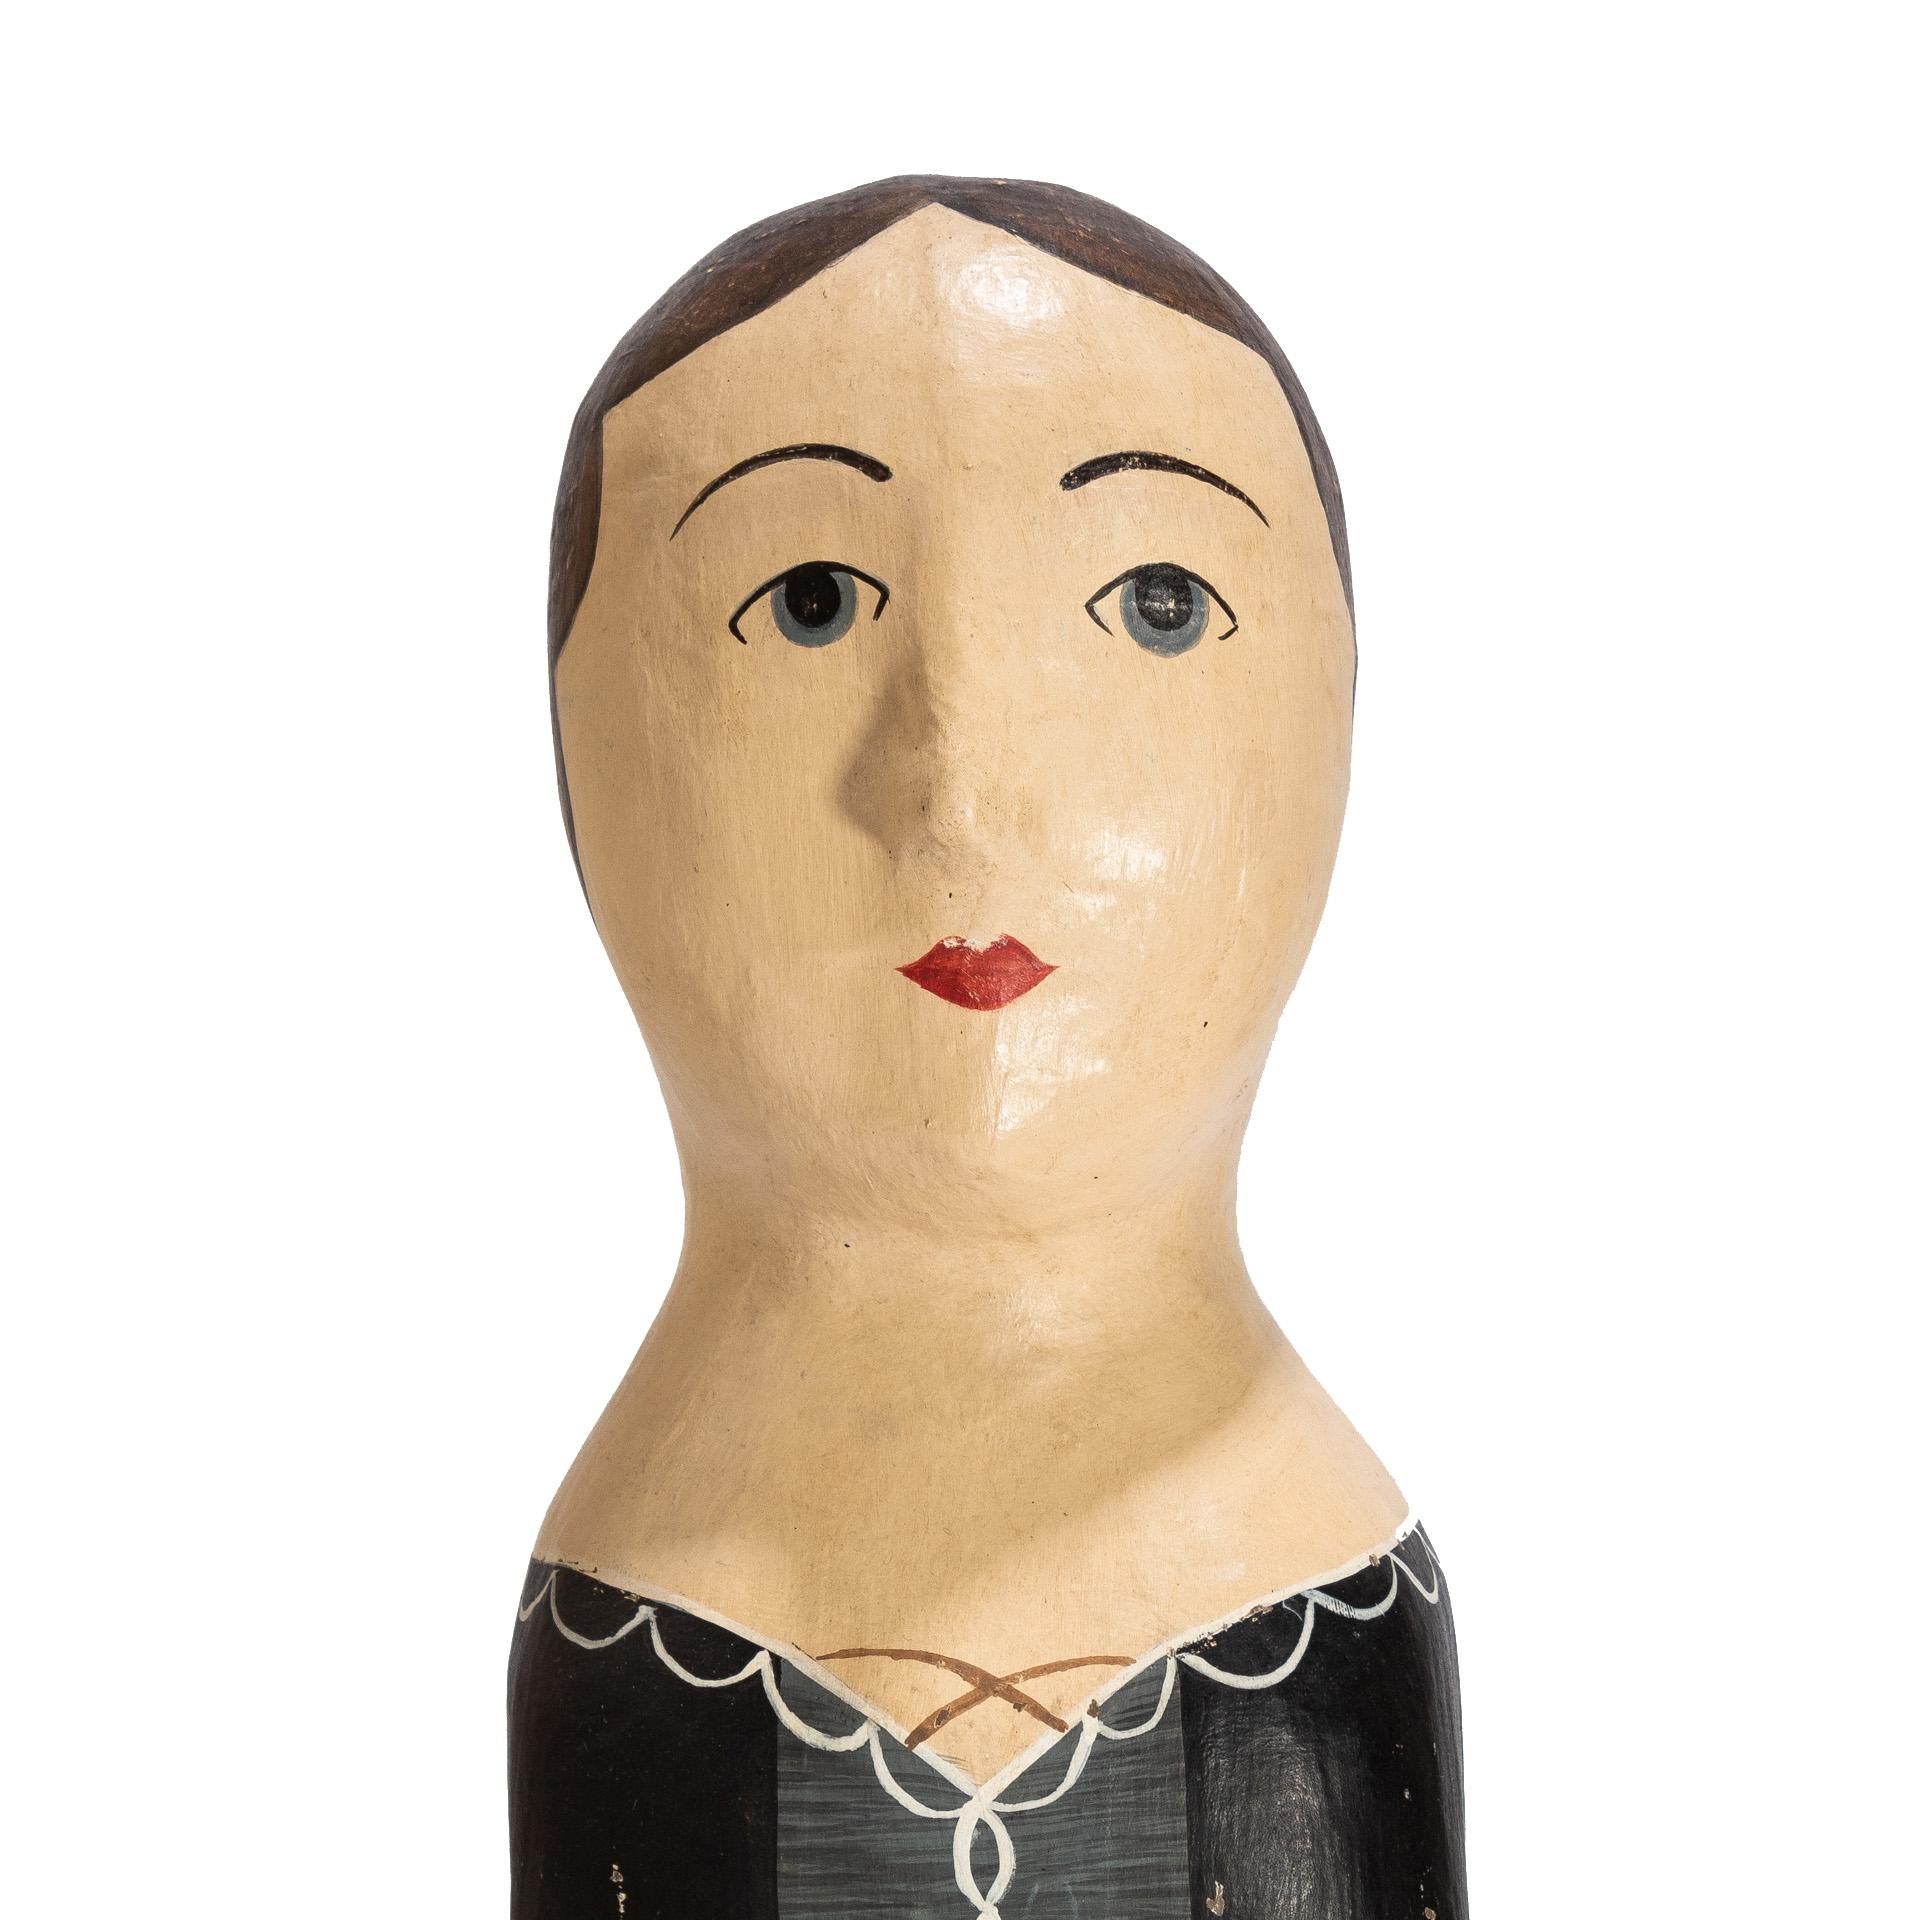 French wig stand or head called Marotte. In original paint out of papier mâché.